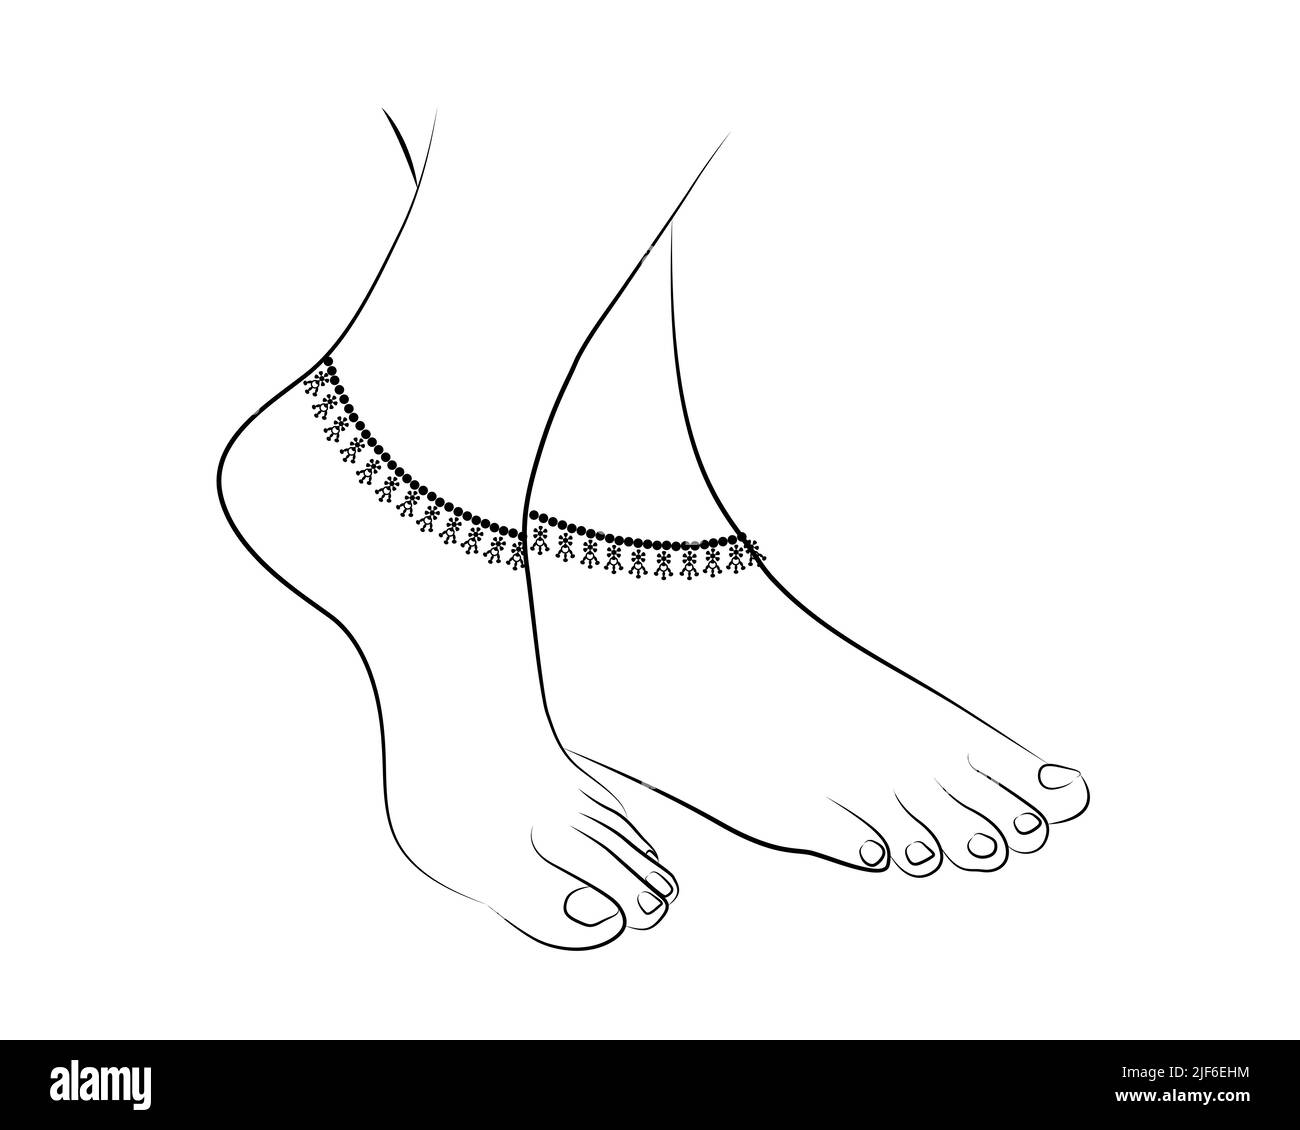 Single line drawing feet Black and White Stock Photos & Images - Alamy